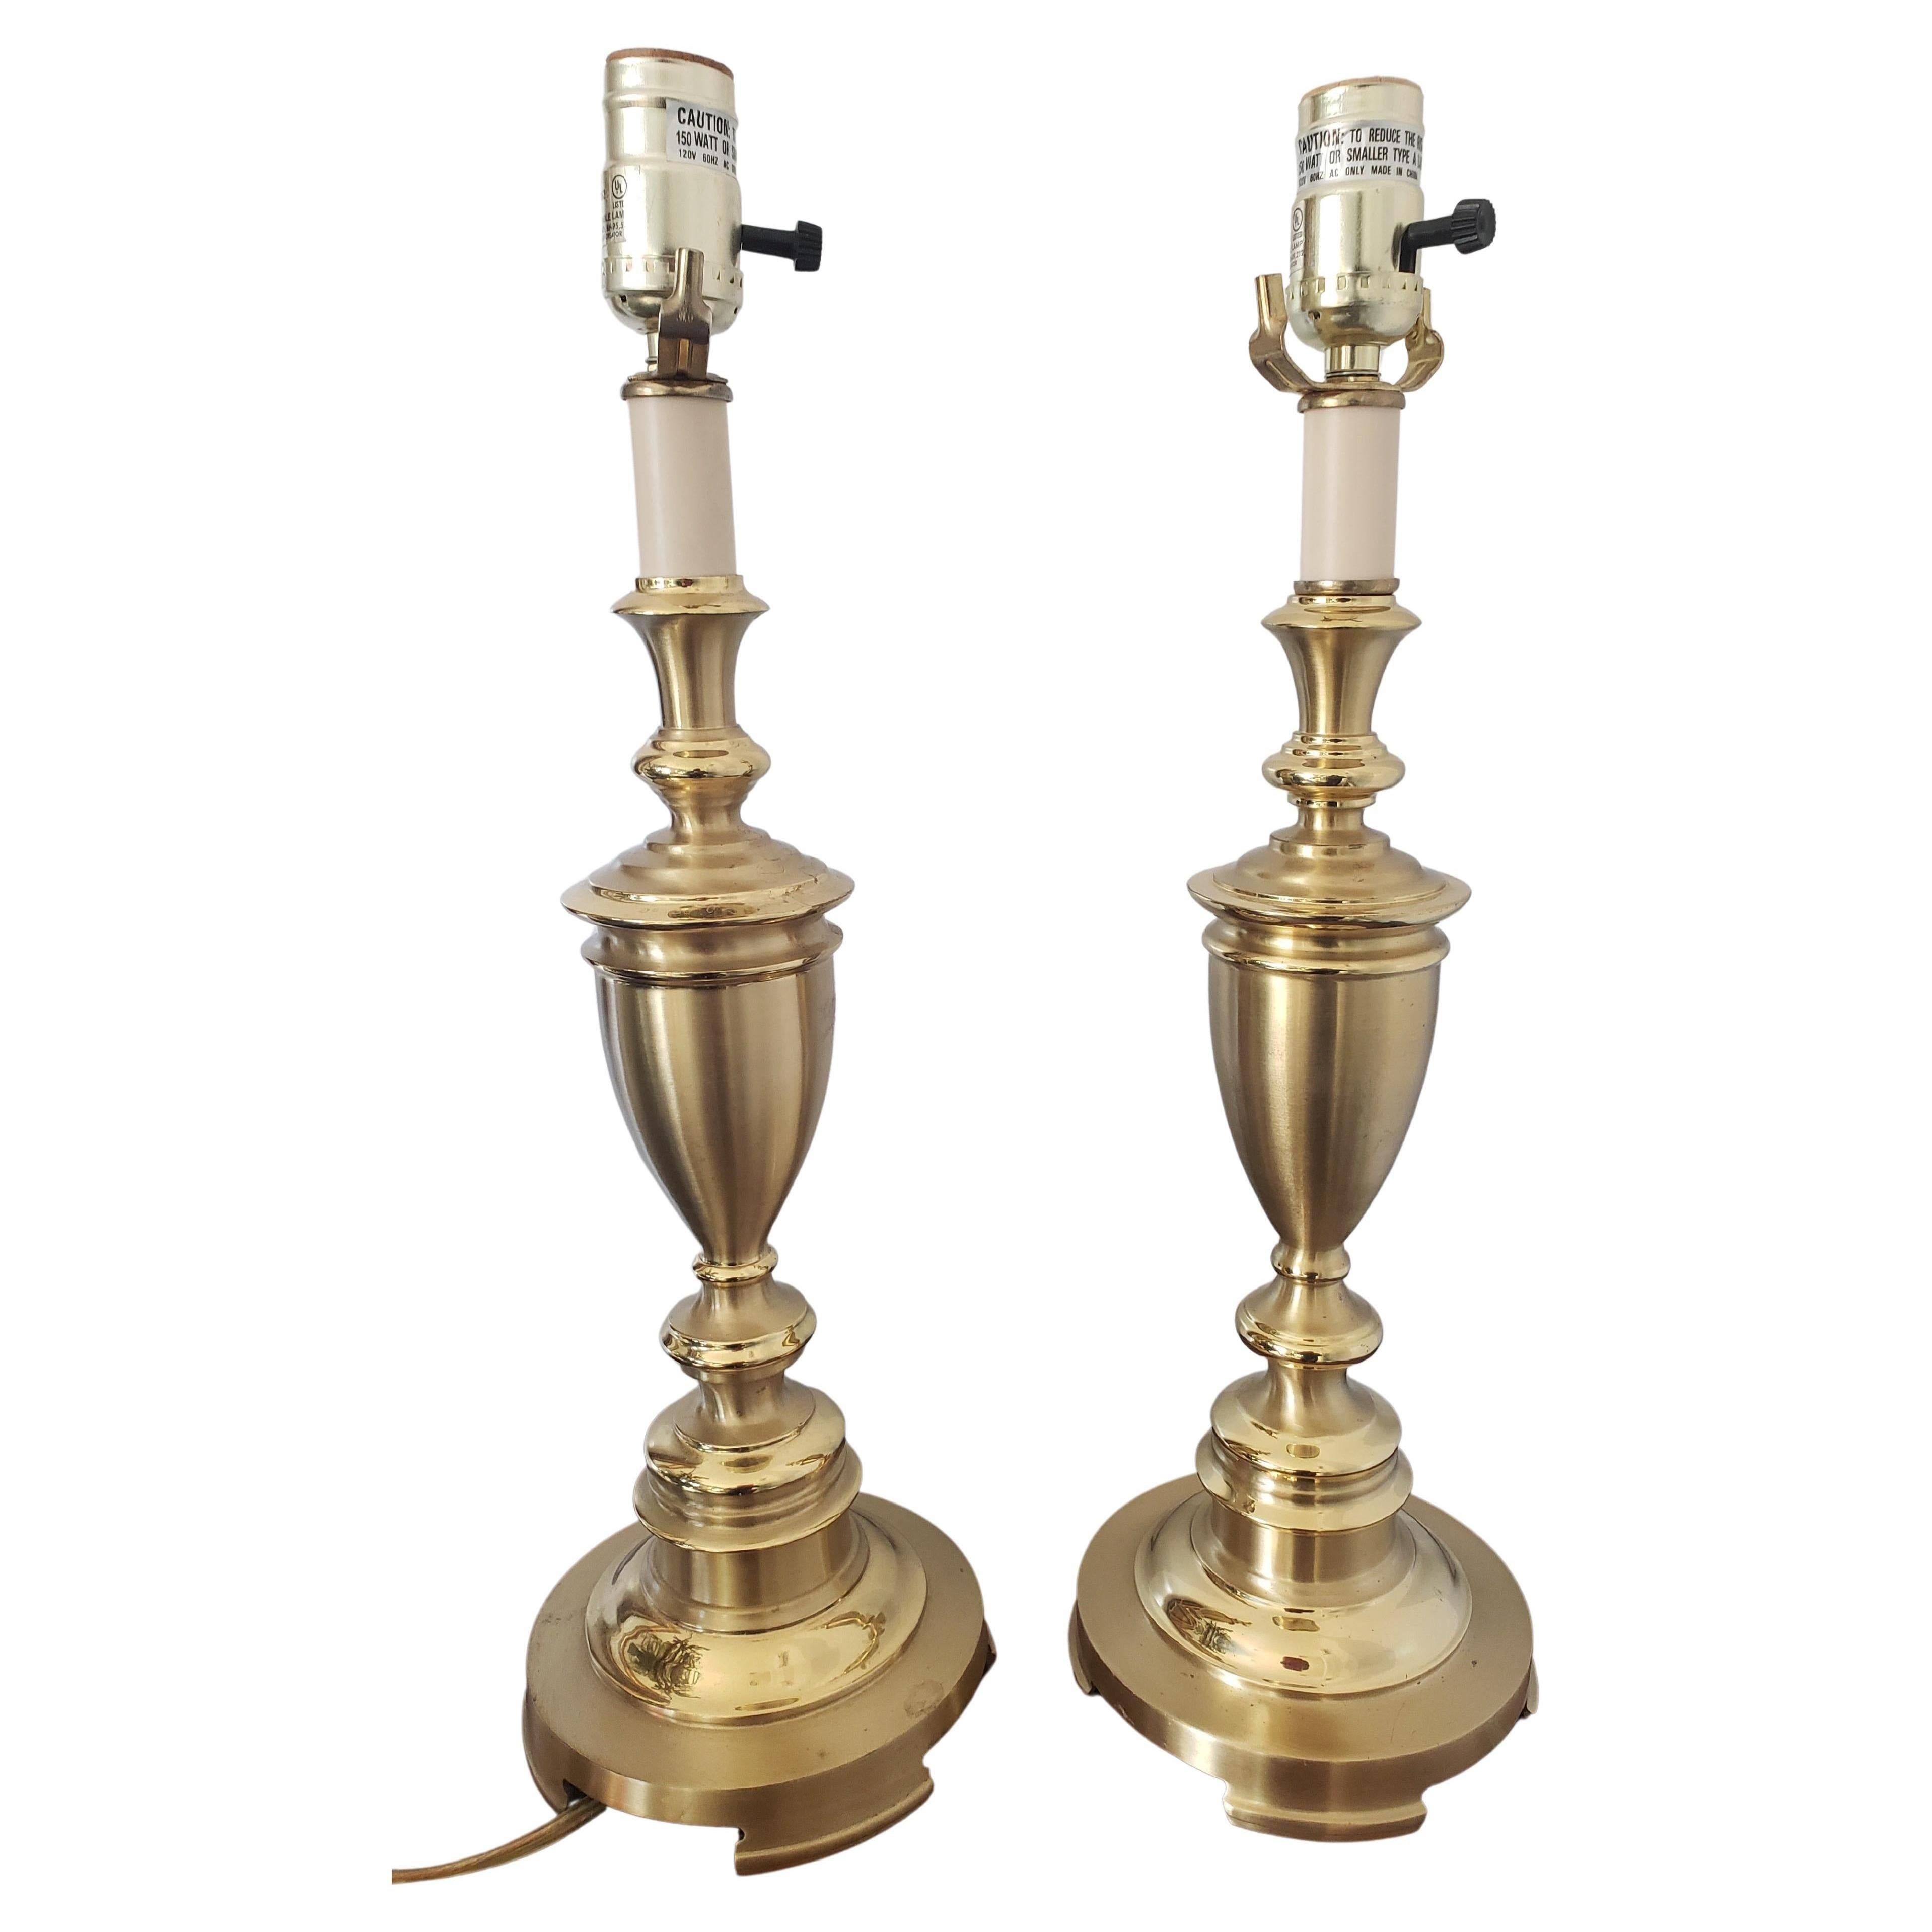 Stunning pair of solid brass trophy table lamps attributed to Stiffel. Very good condition. Medium size lamps perfect for small rooms and small areas. 
Measure 19